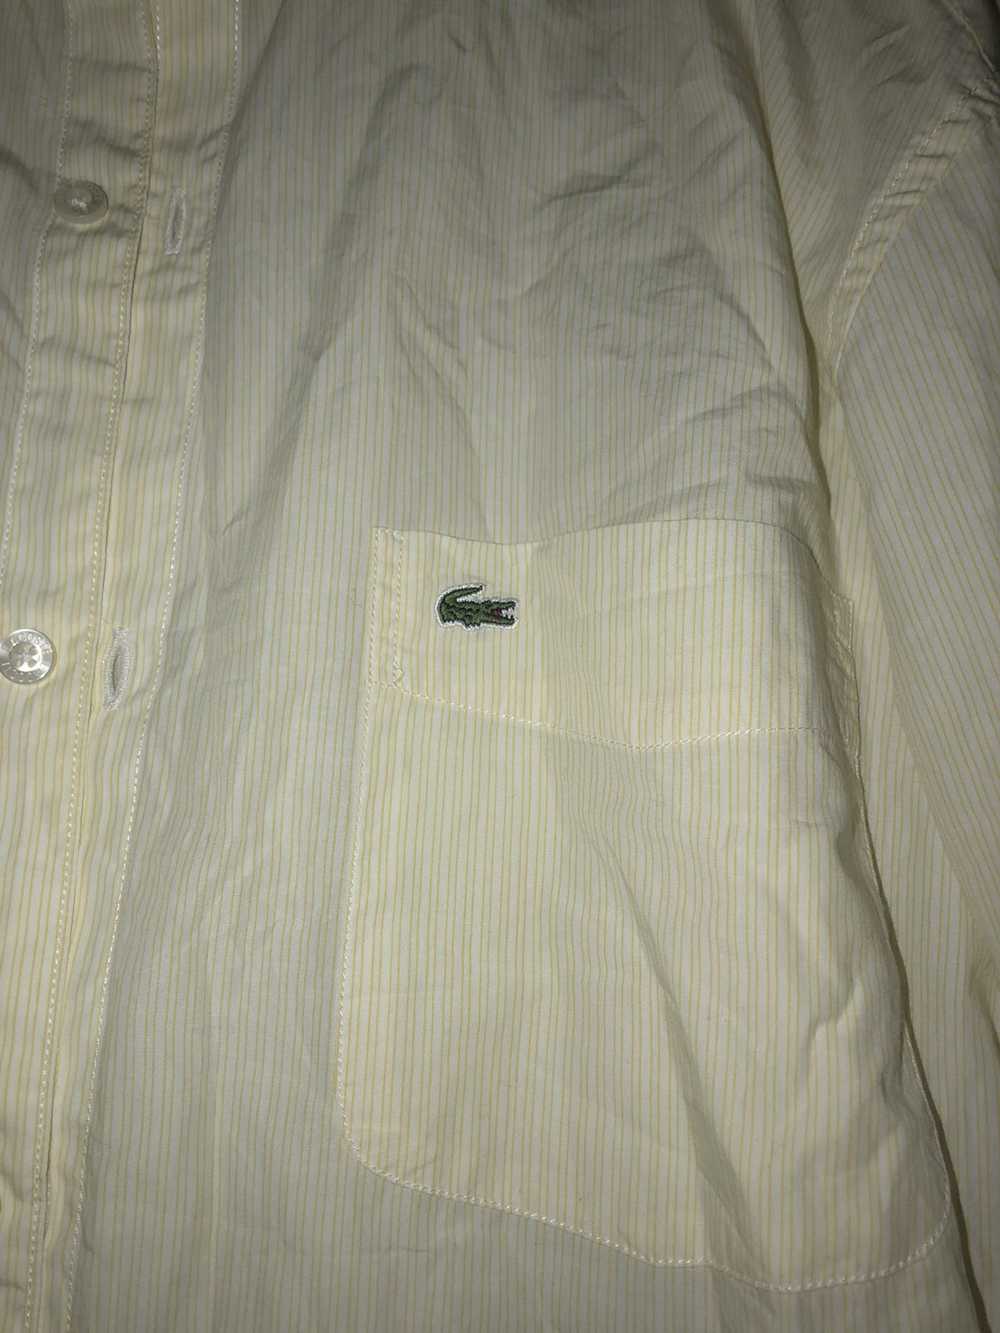 Lacoste Lacoste Yellow button up - image 2